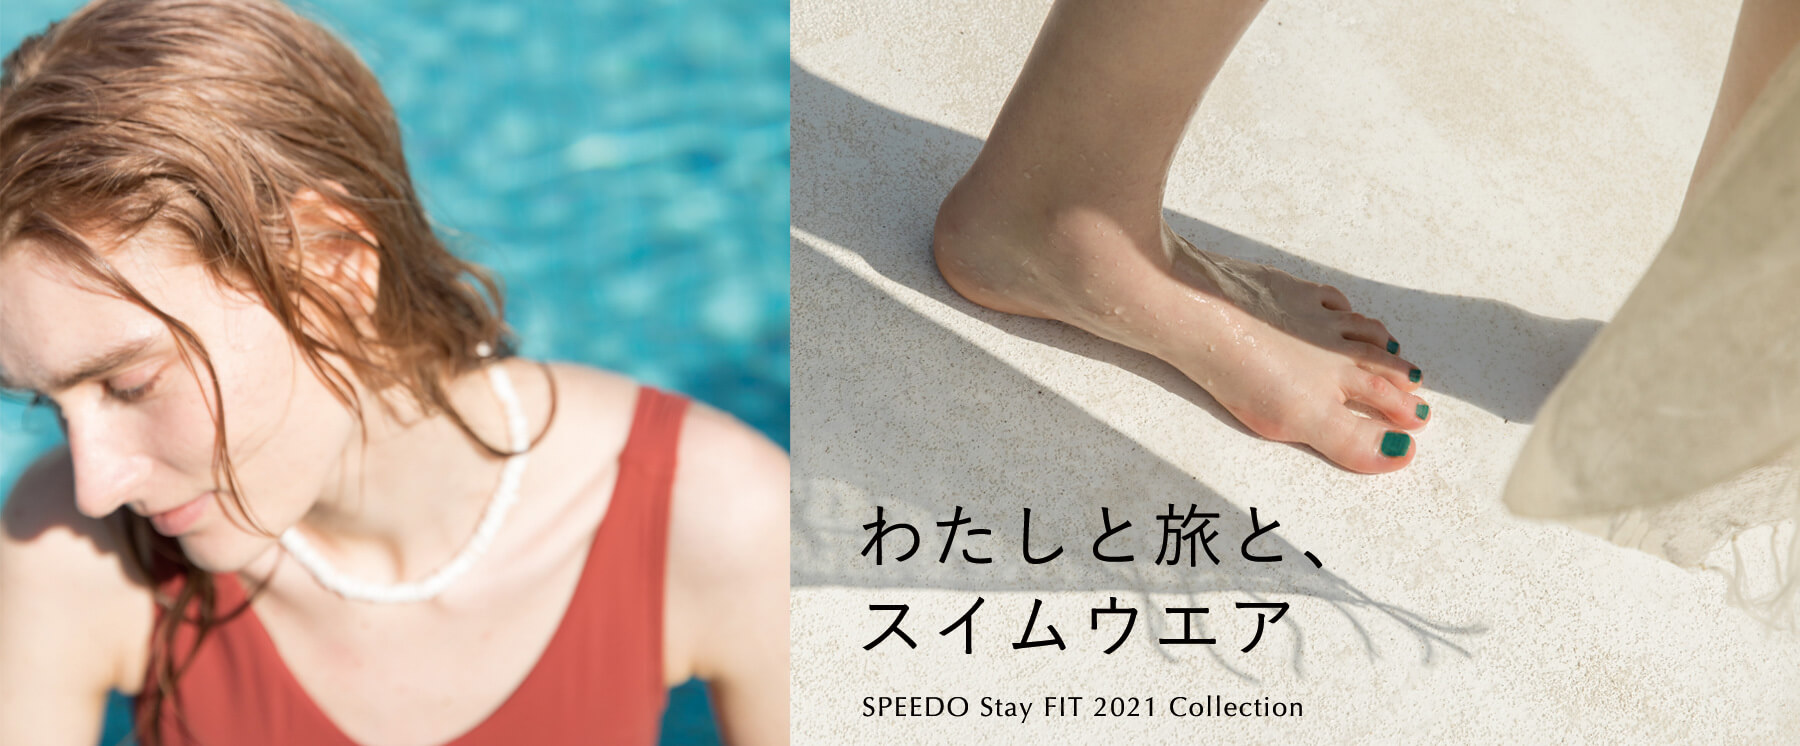 SPEEDO Stay FIT 2021  Collection